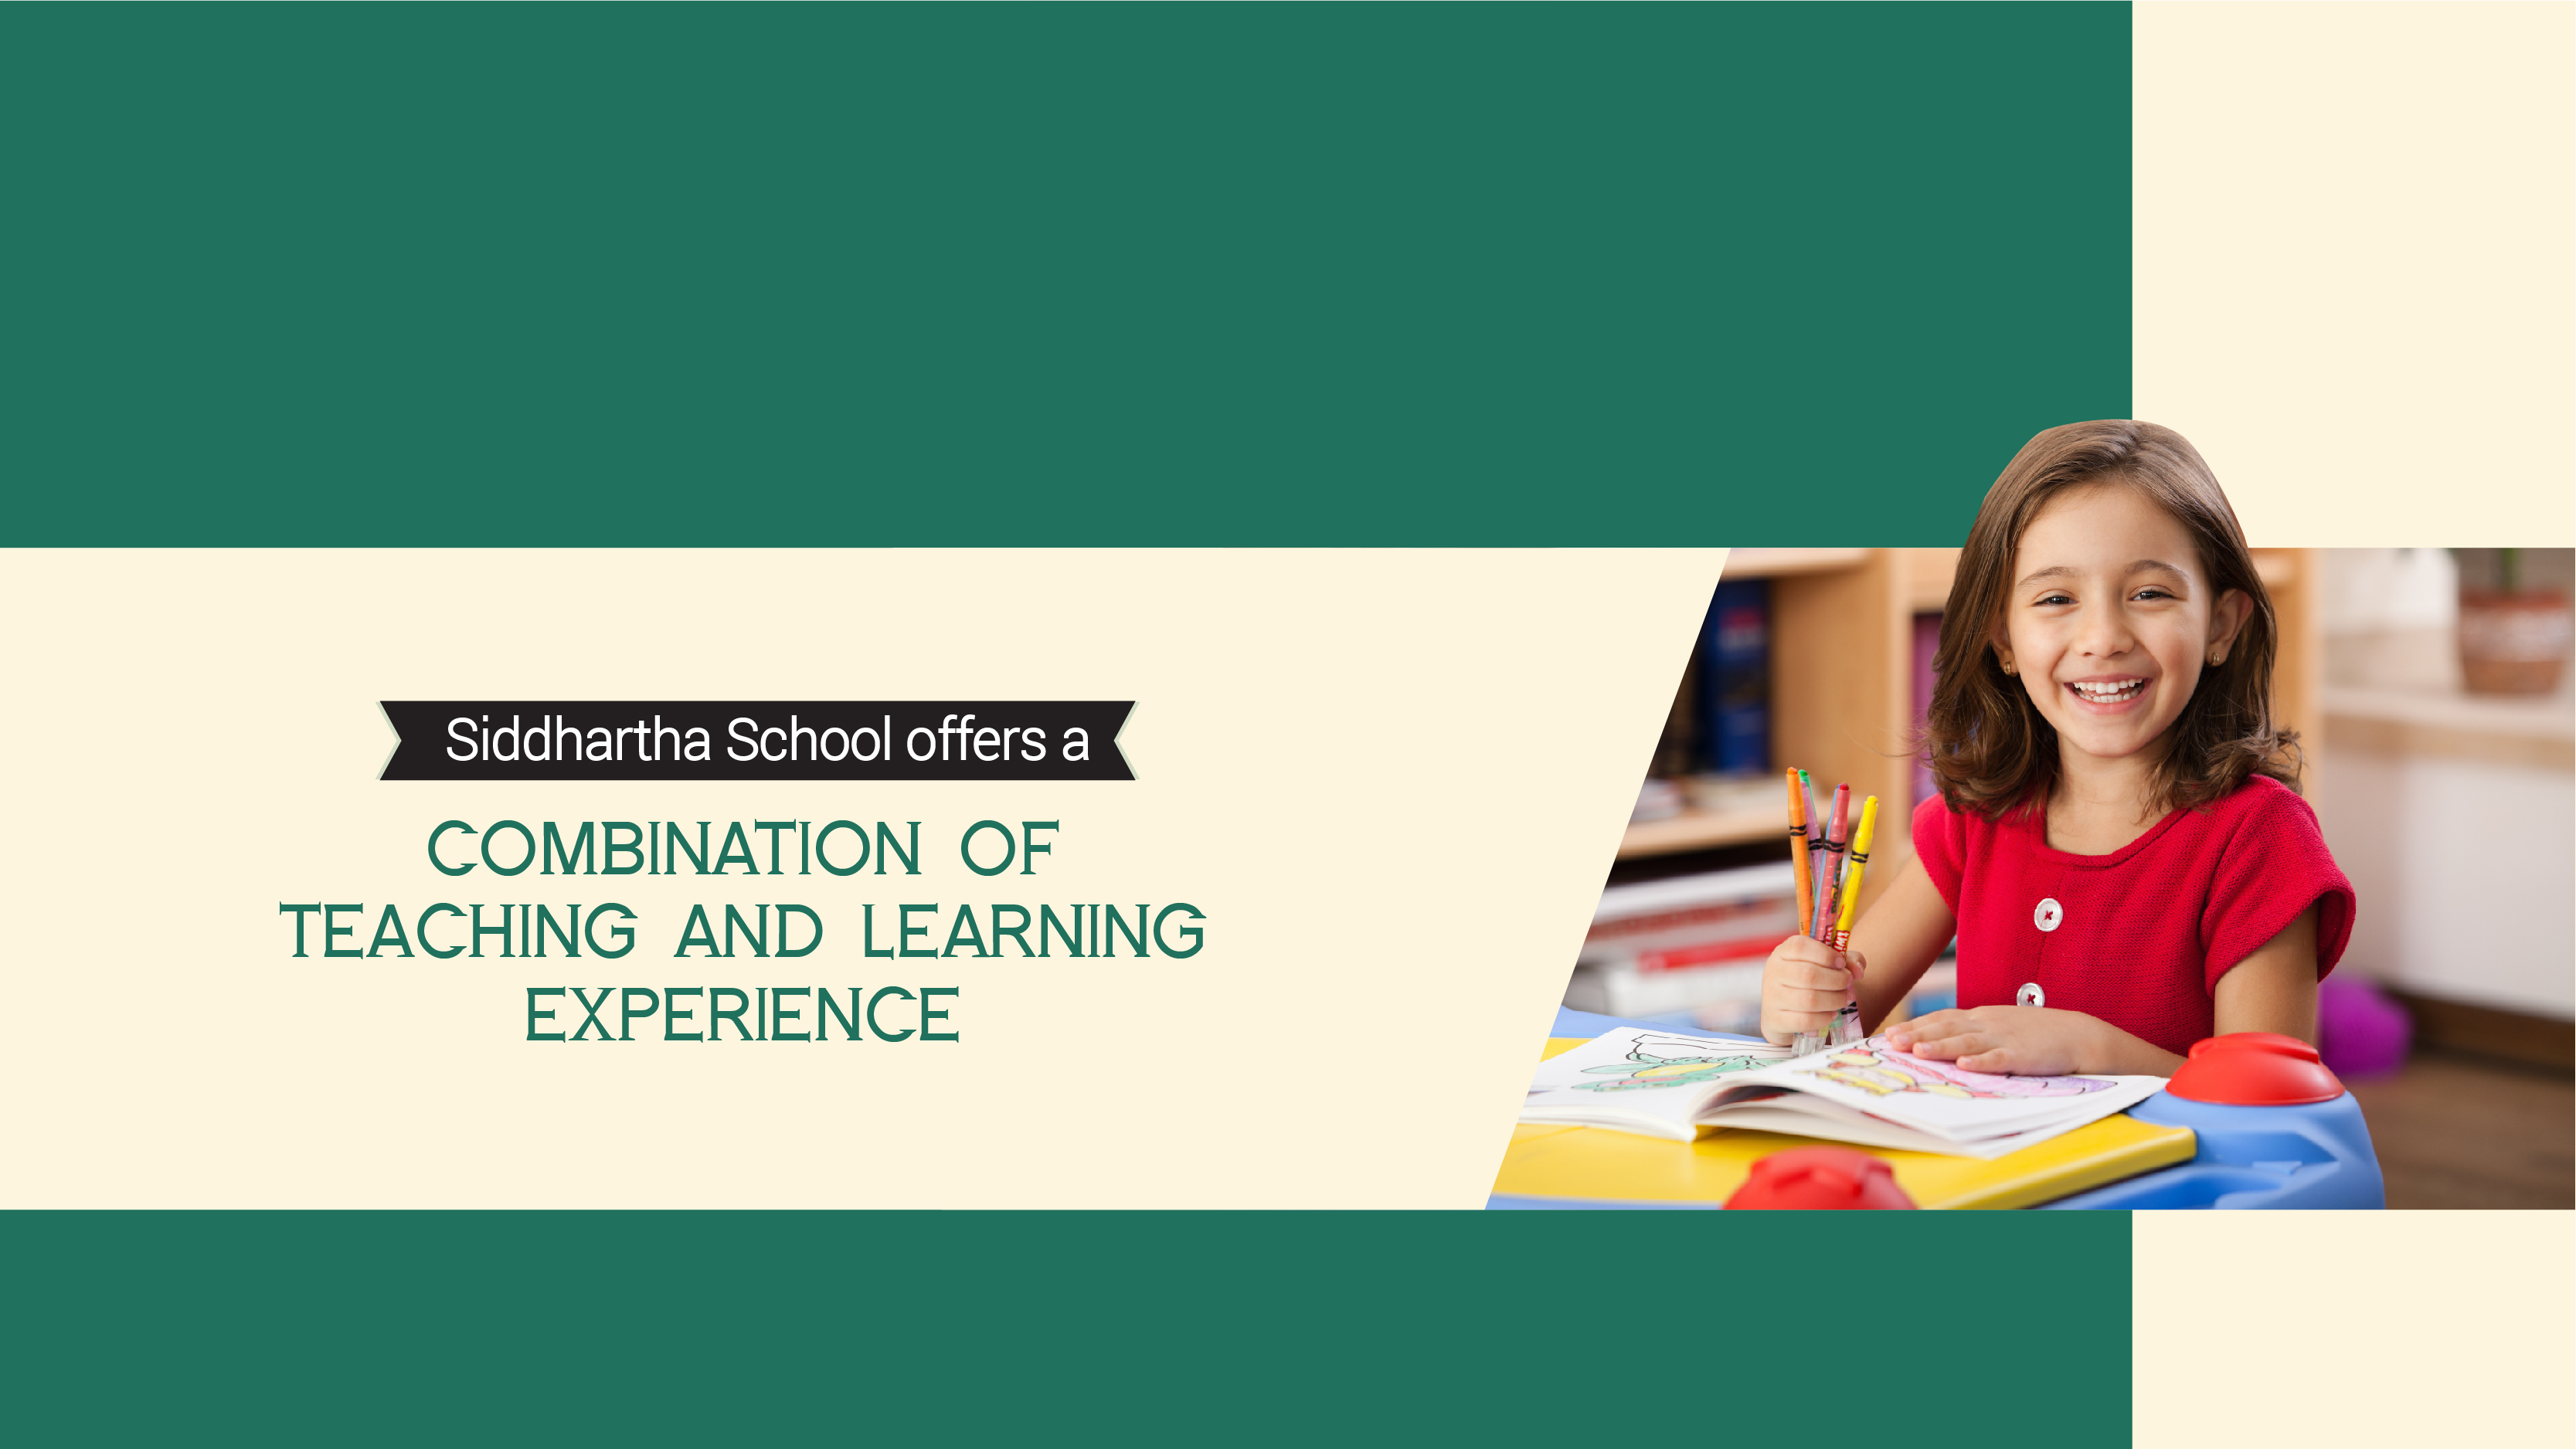 Siddhartha School offers a combination of teaching and learning experience